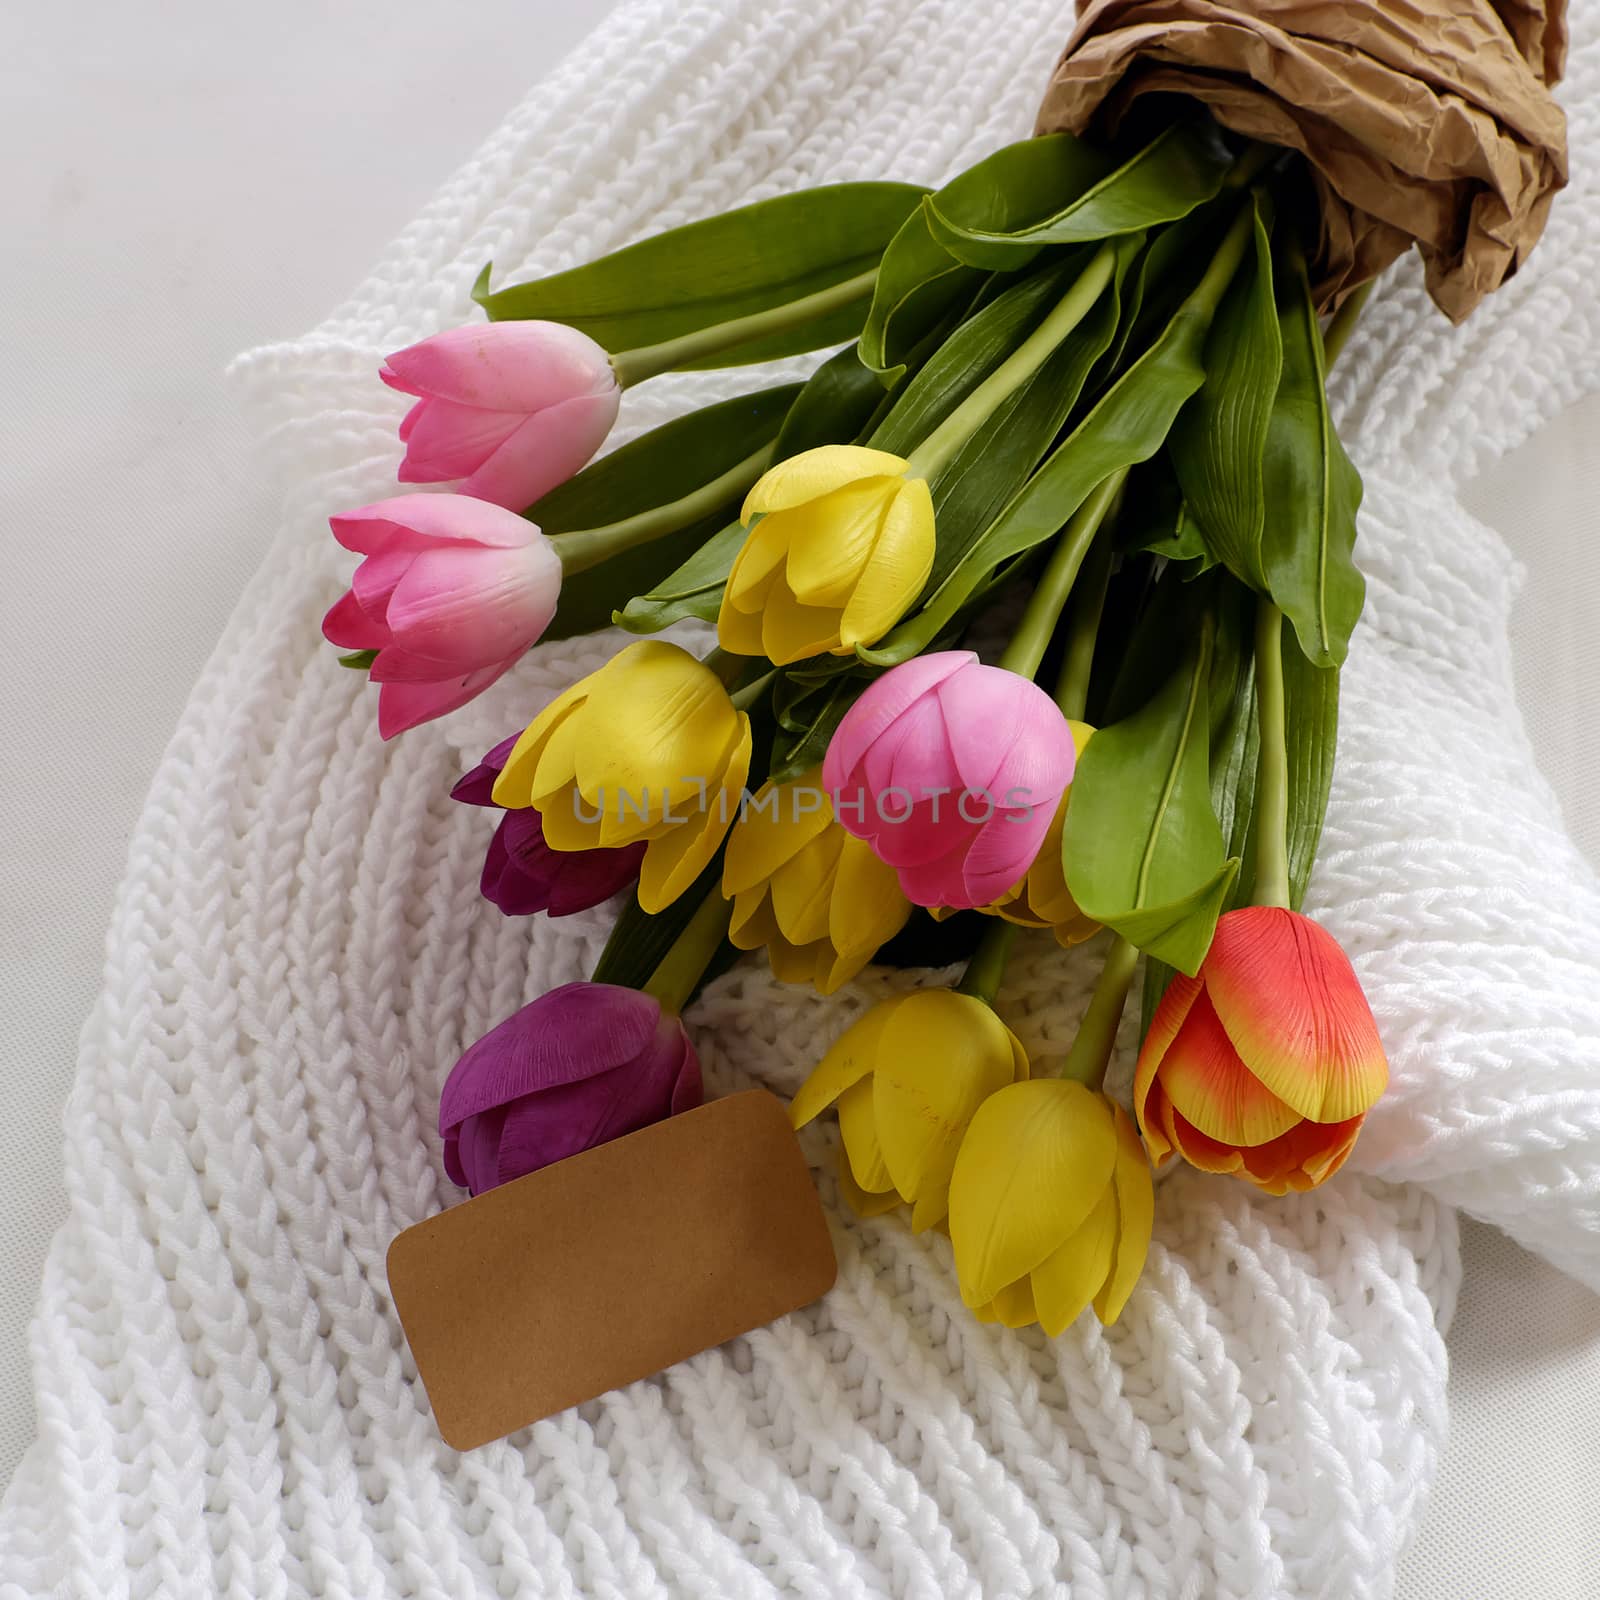 Happy mother day with meaningful handmade gift include knitted white scarf and tulip flower bouquet from clay, gratitude and thank mom for love in special day